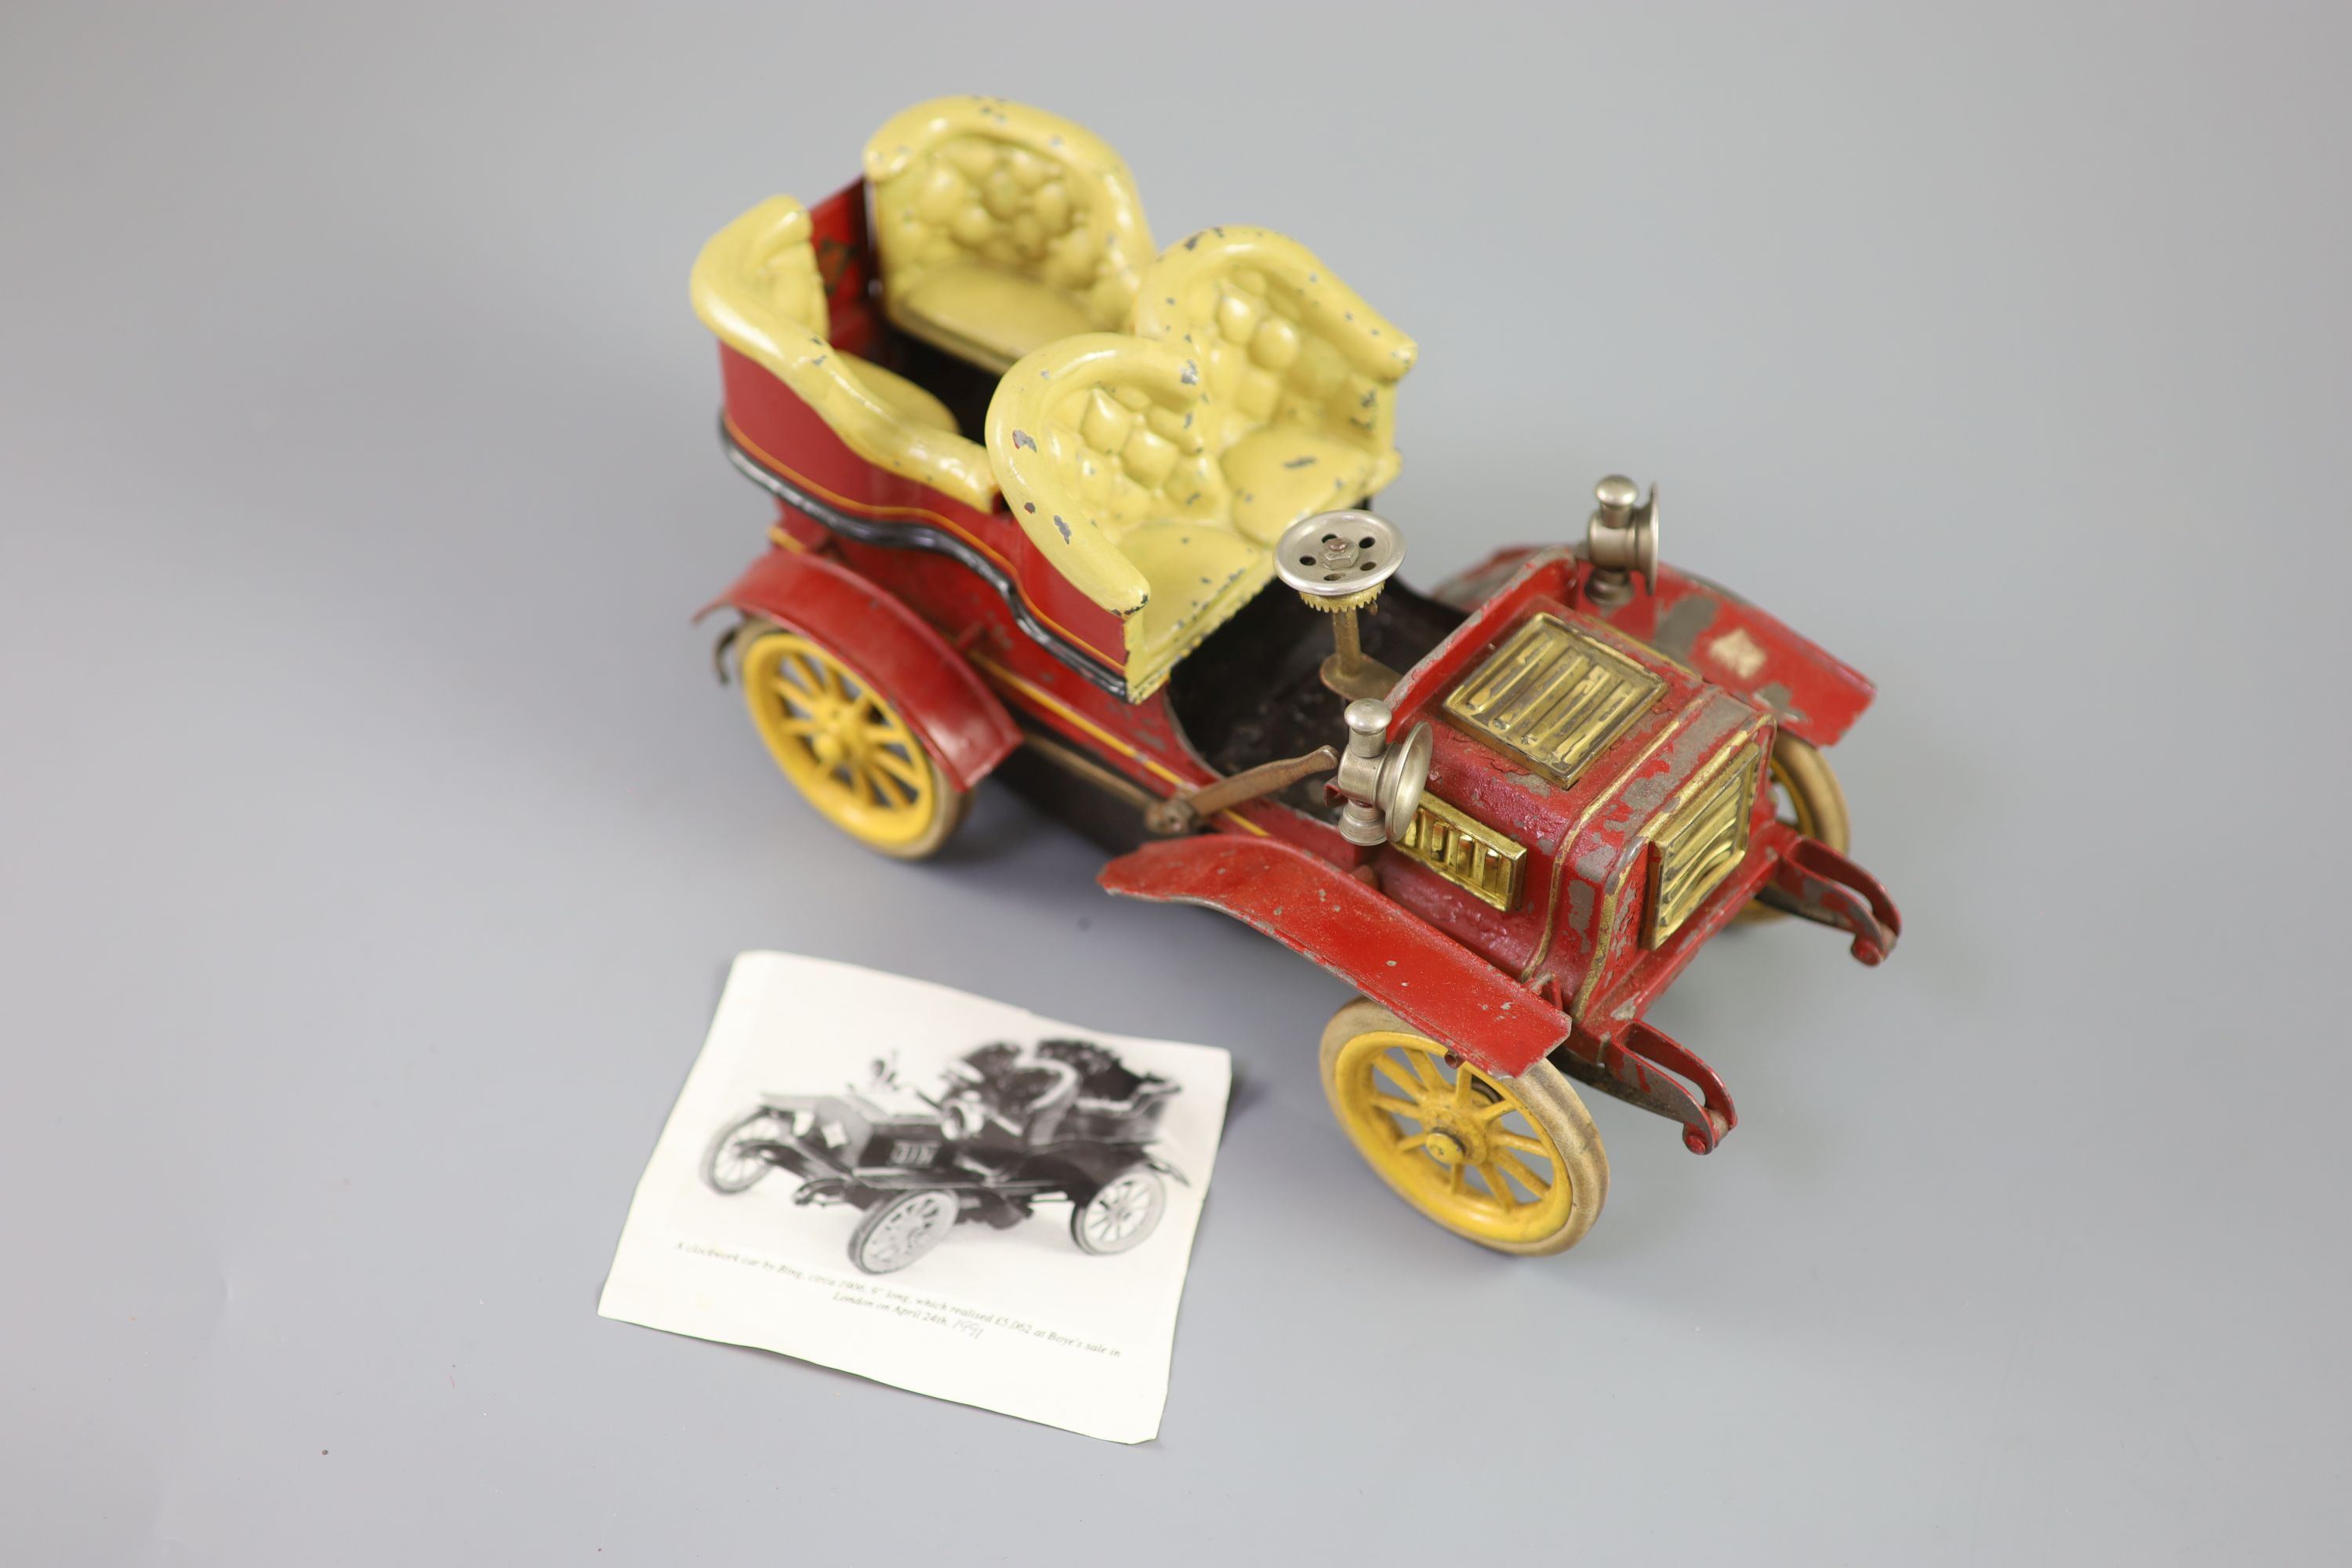 A Bing clockwork tinplate car, c.1906, length 9.5in. width 5in., with original card box and winding key